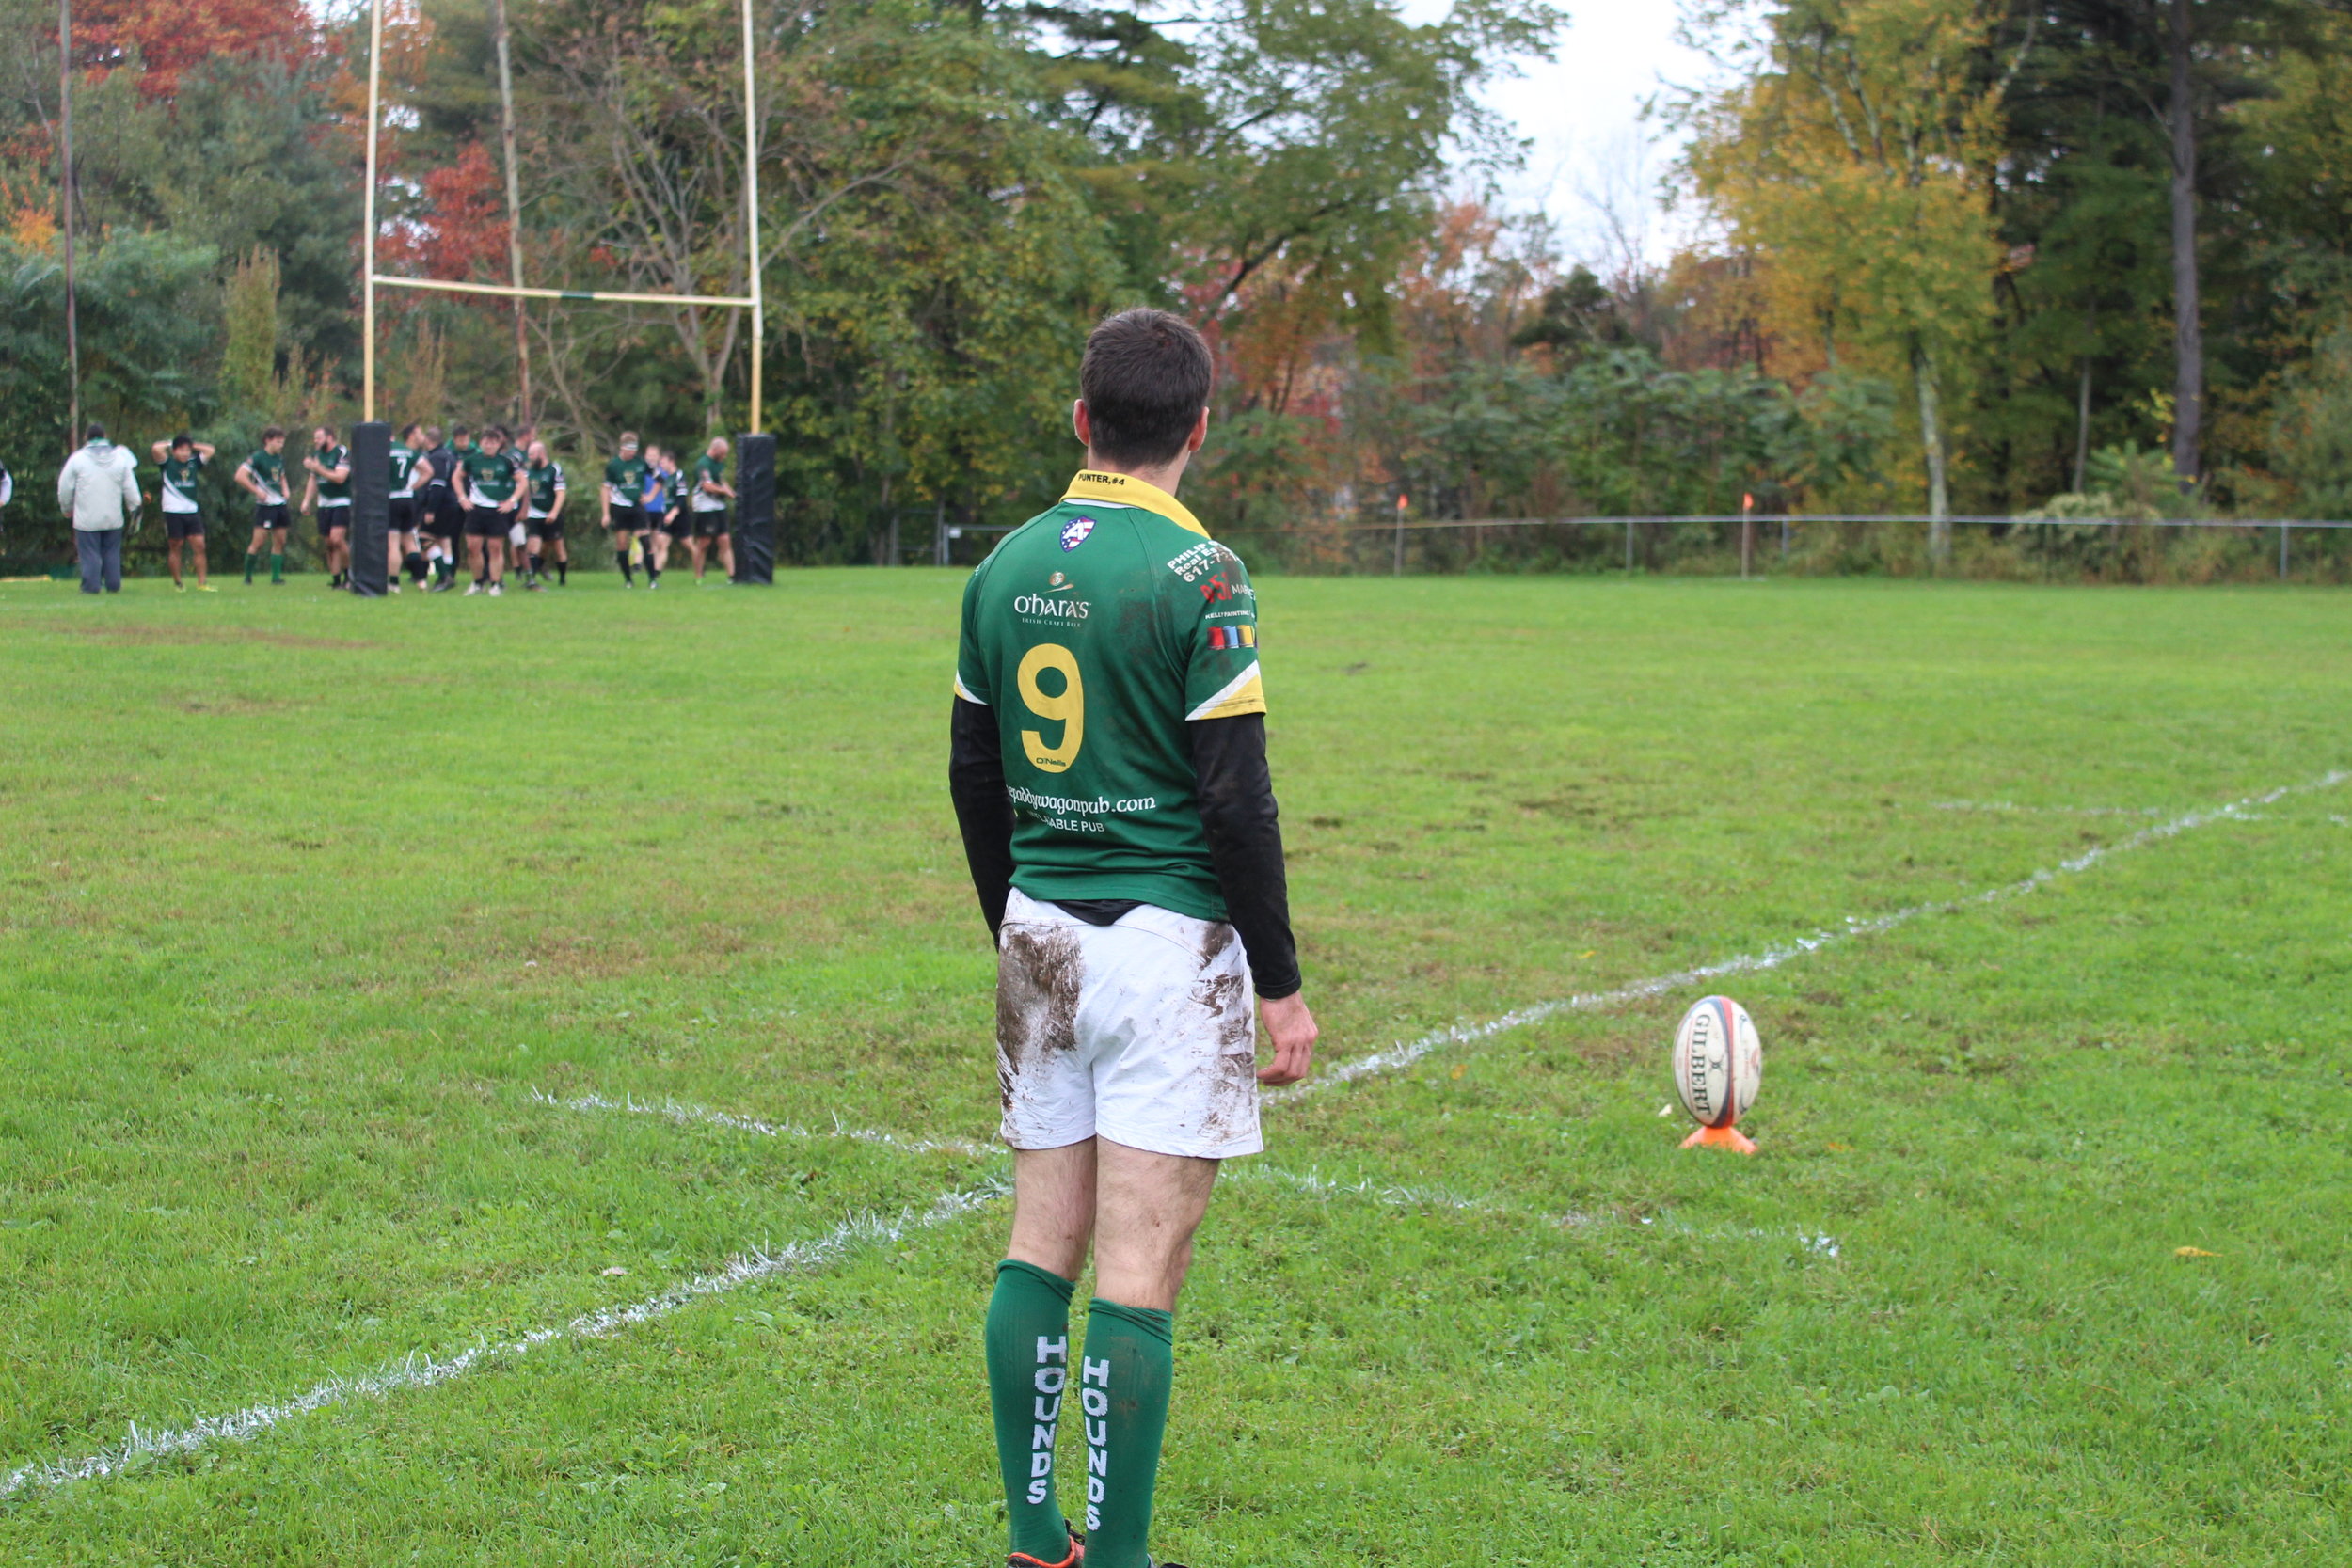 jersey rugby results